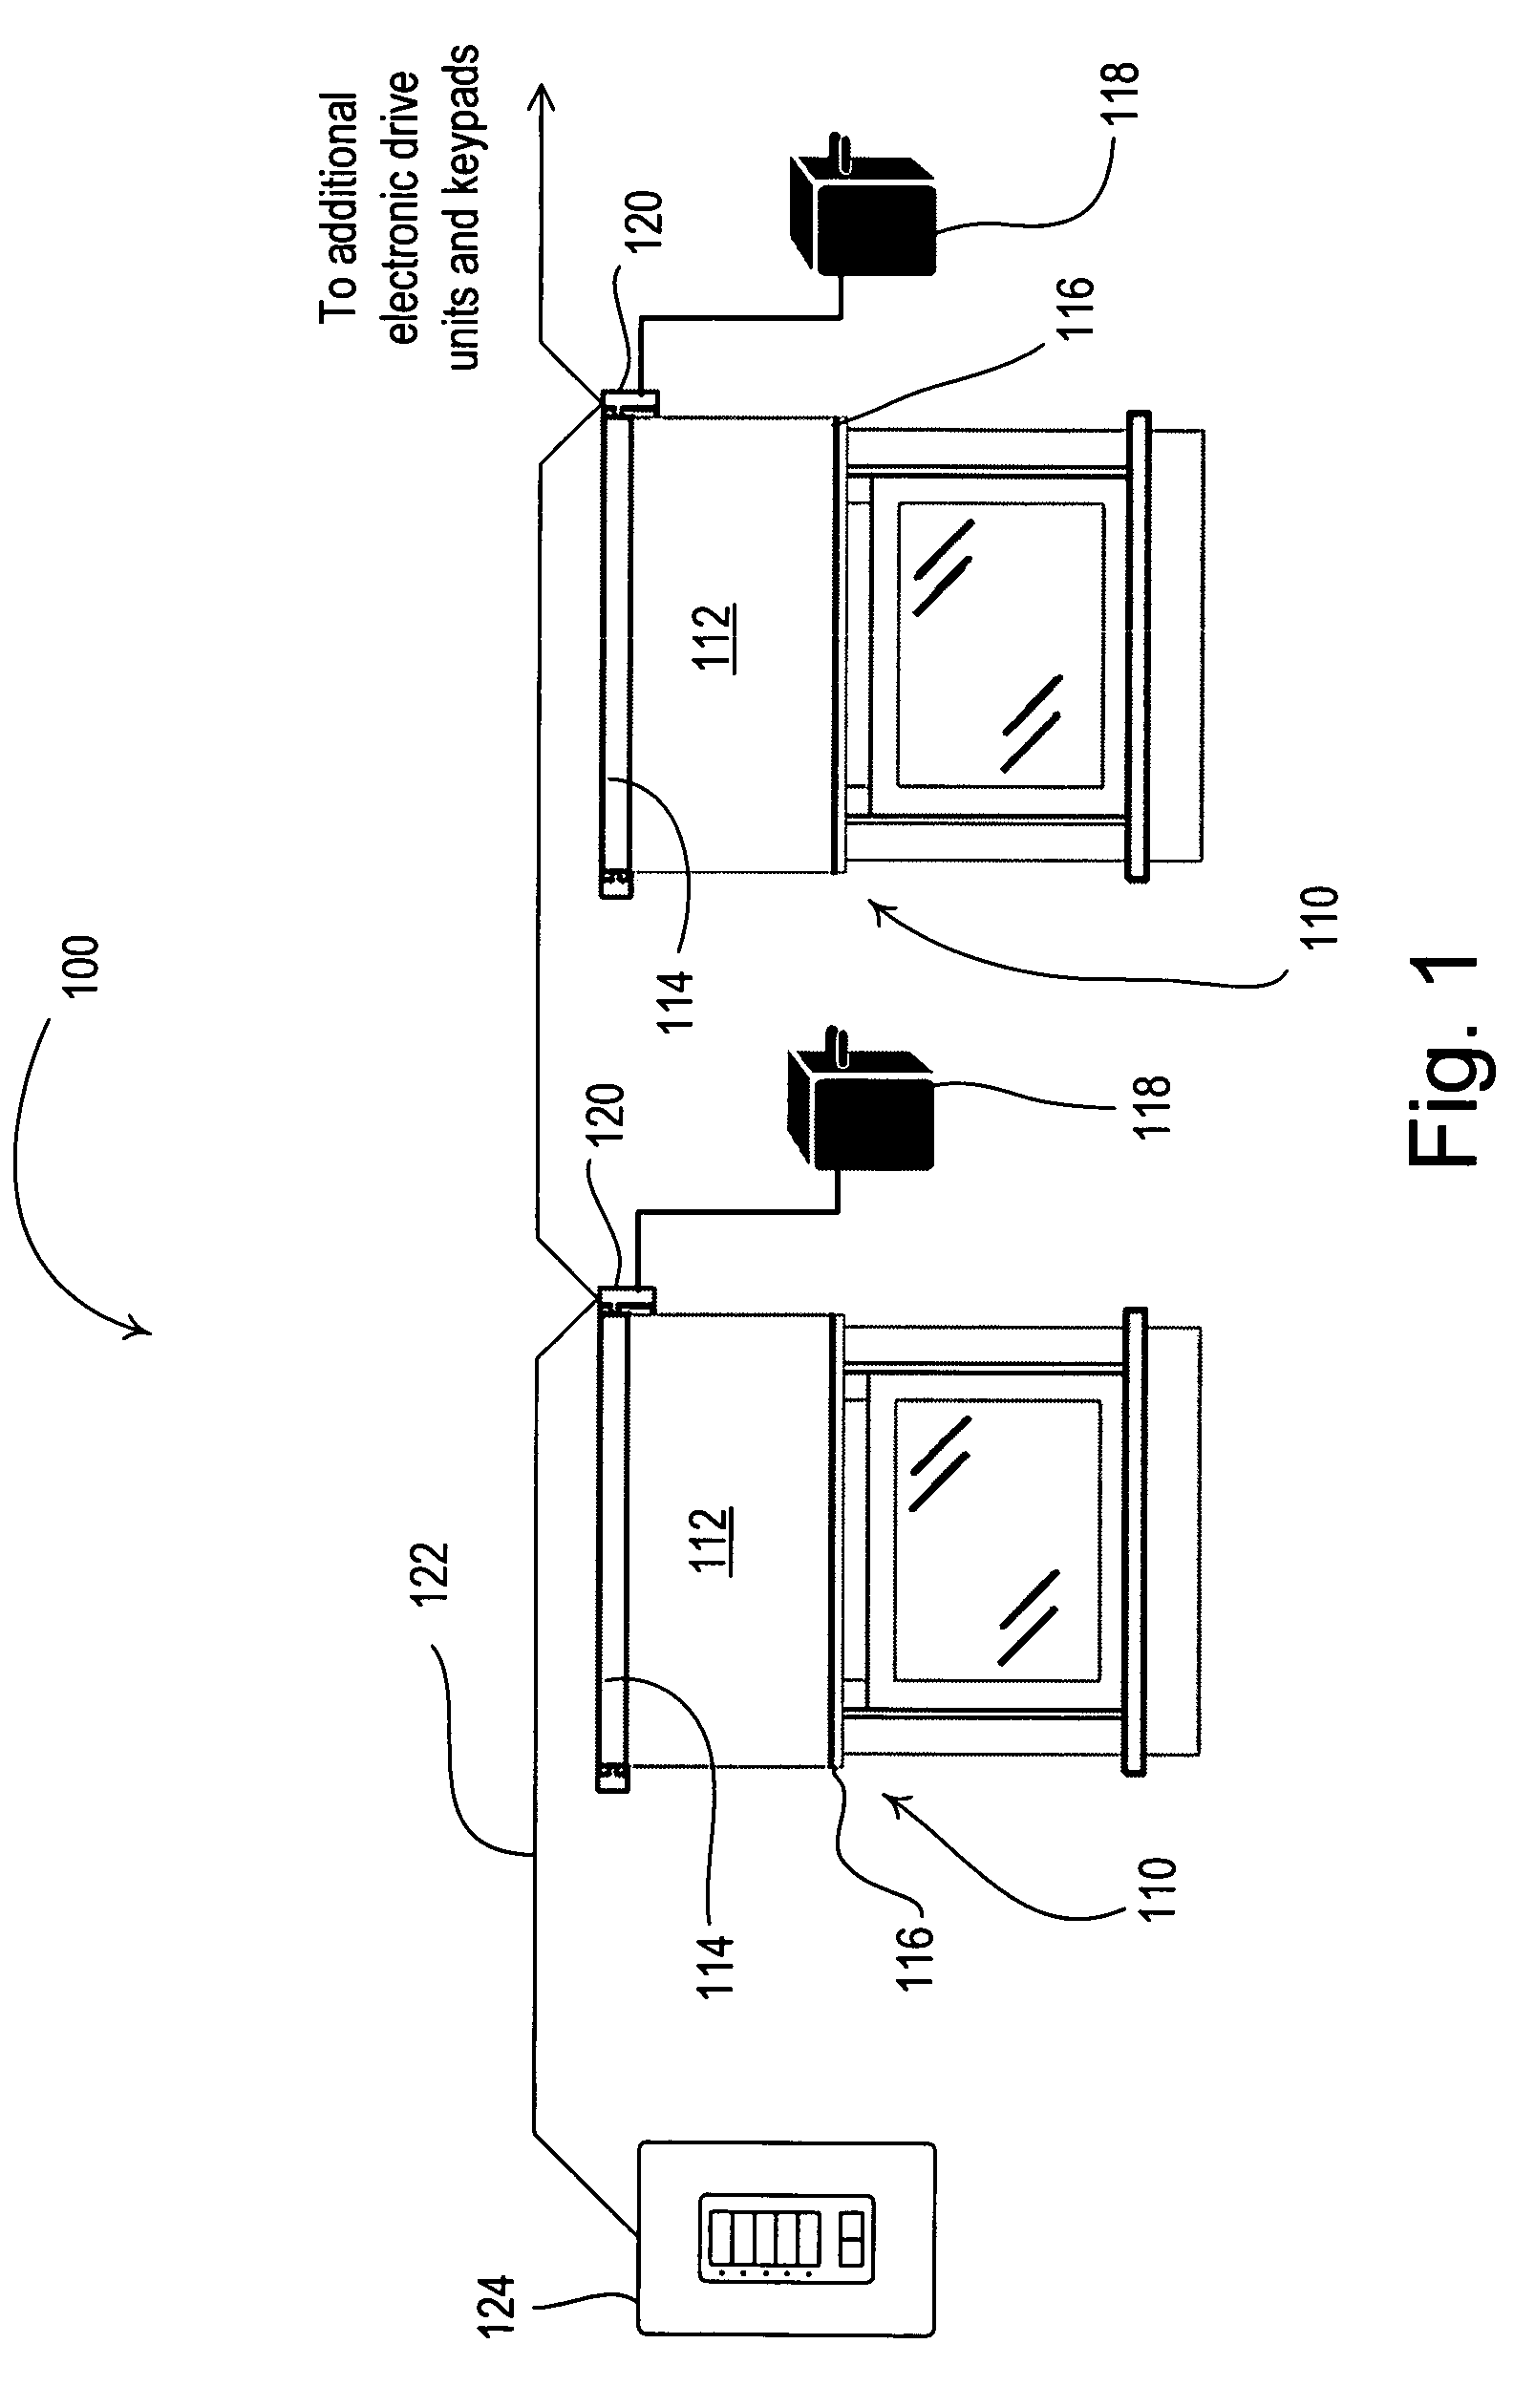 Method of calibrating a motorized roller shade